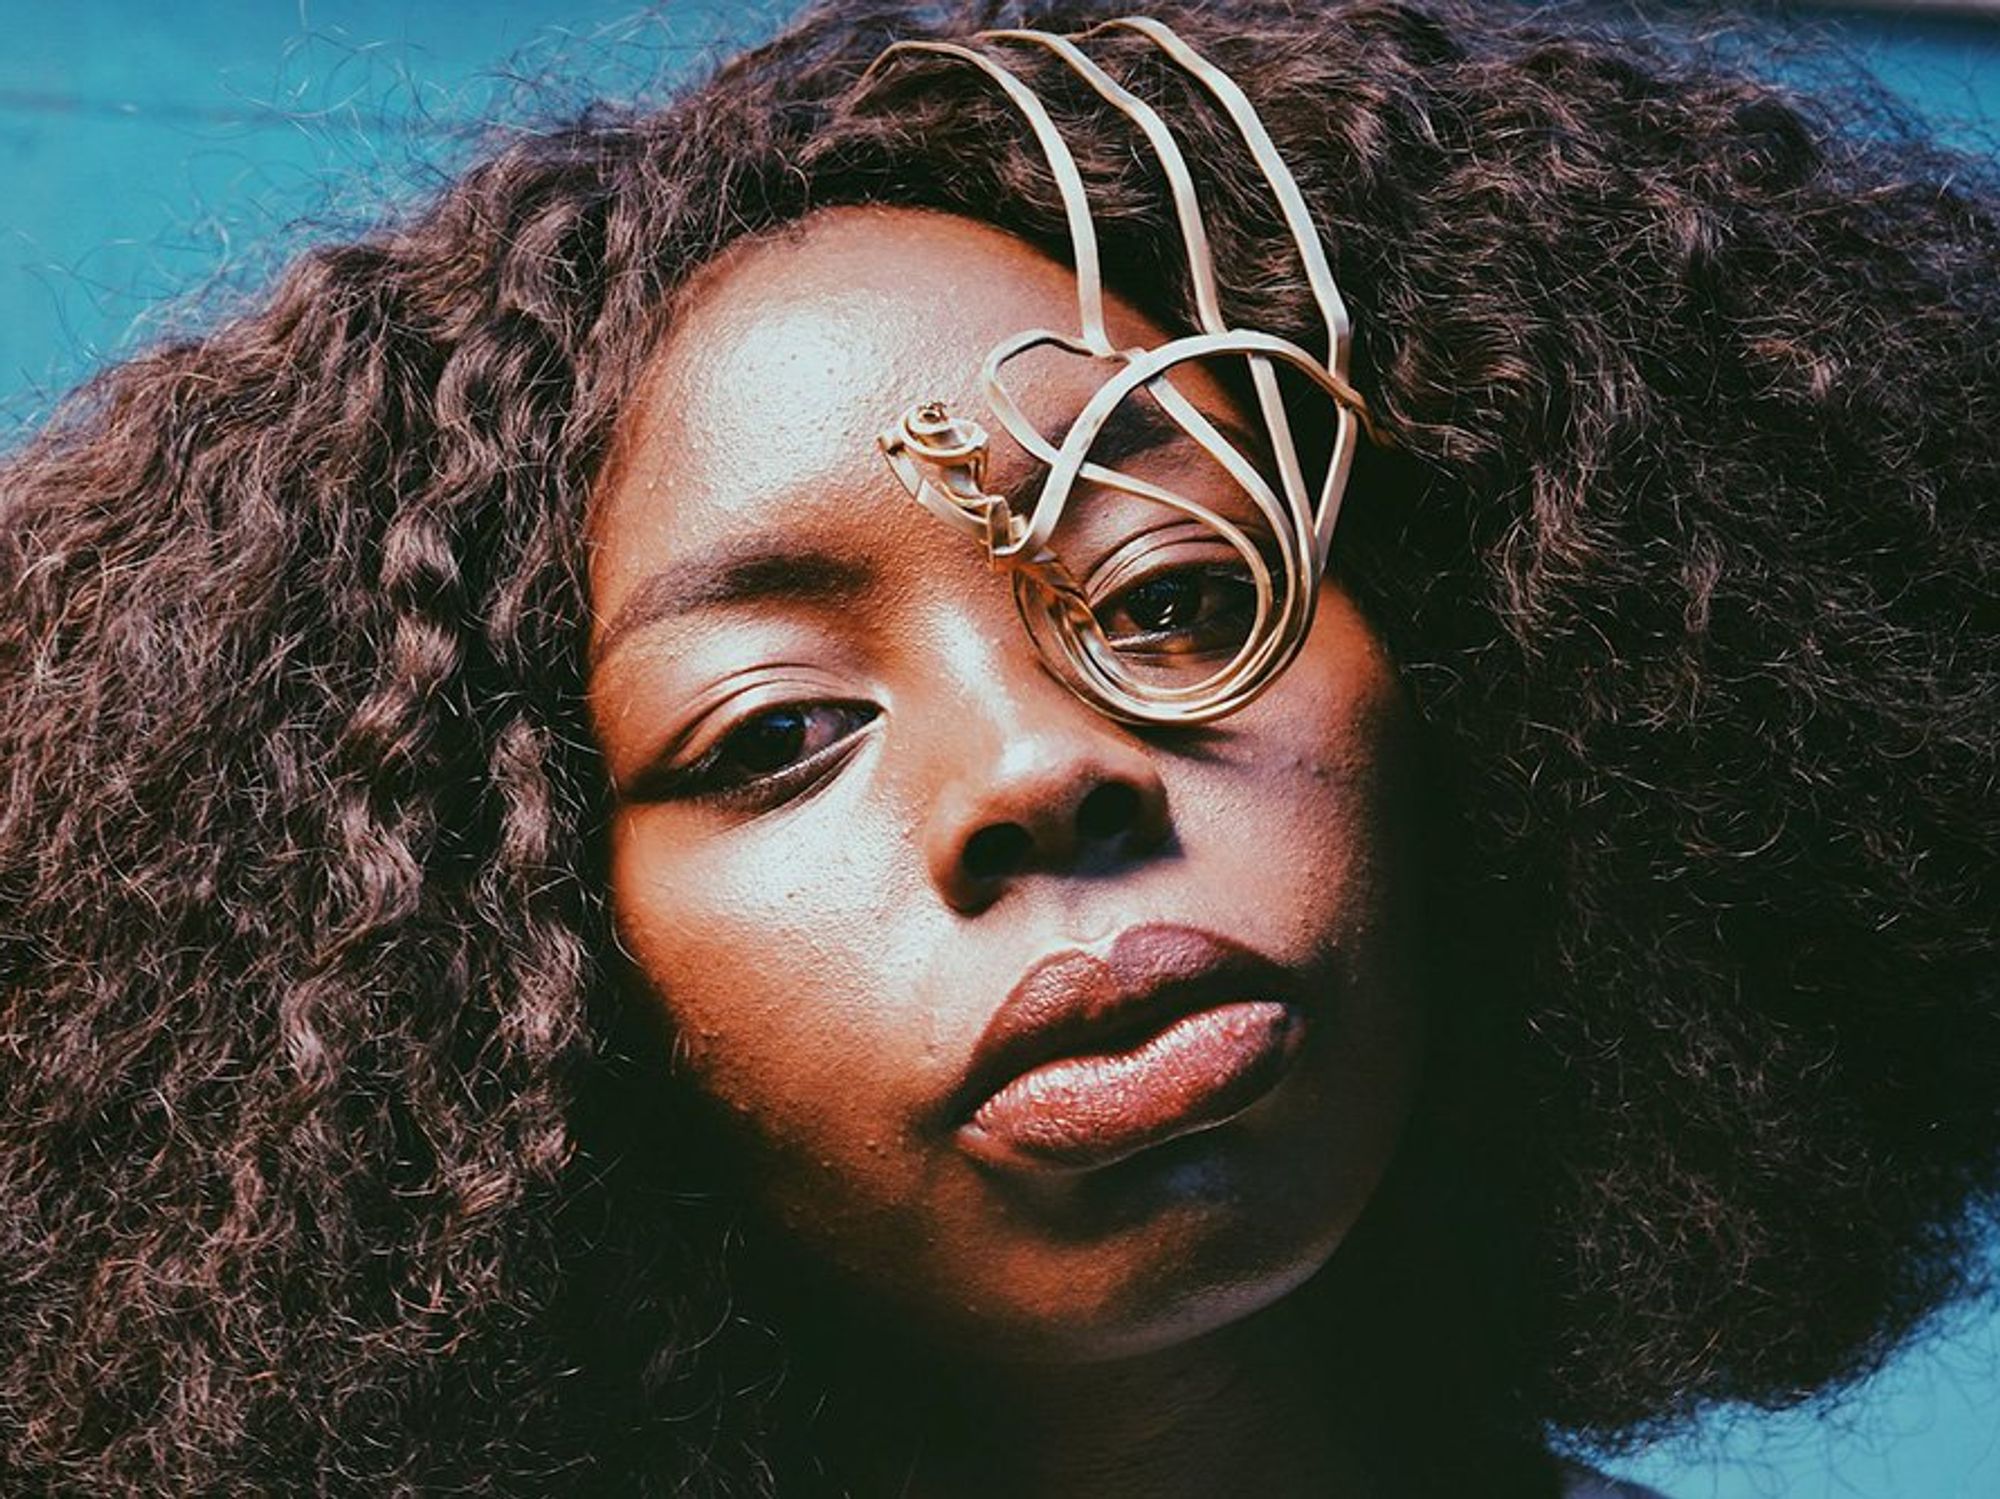 A model wears an intricate piece of African jewelry over her eye.